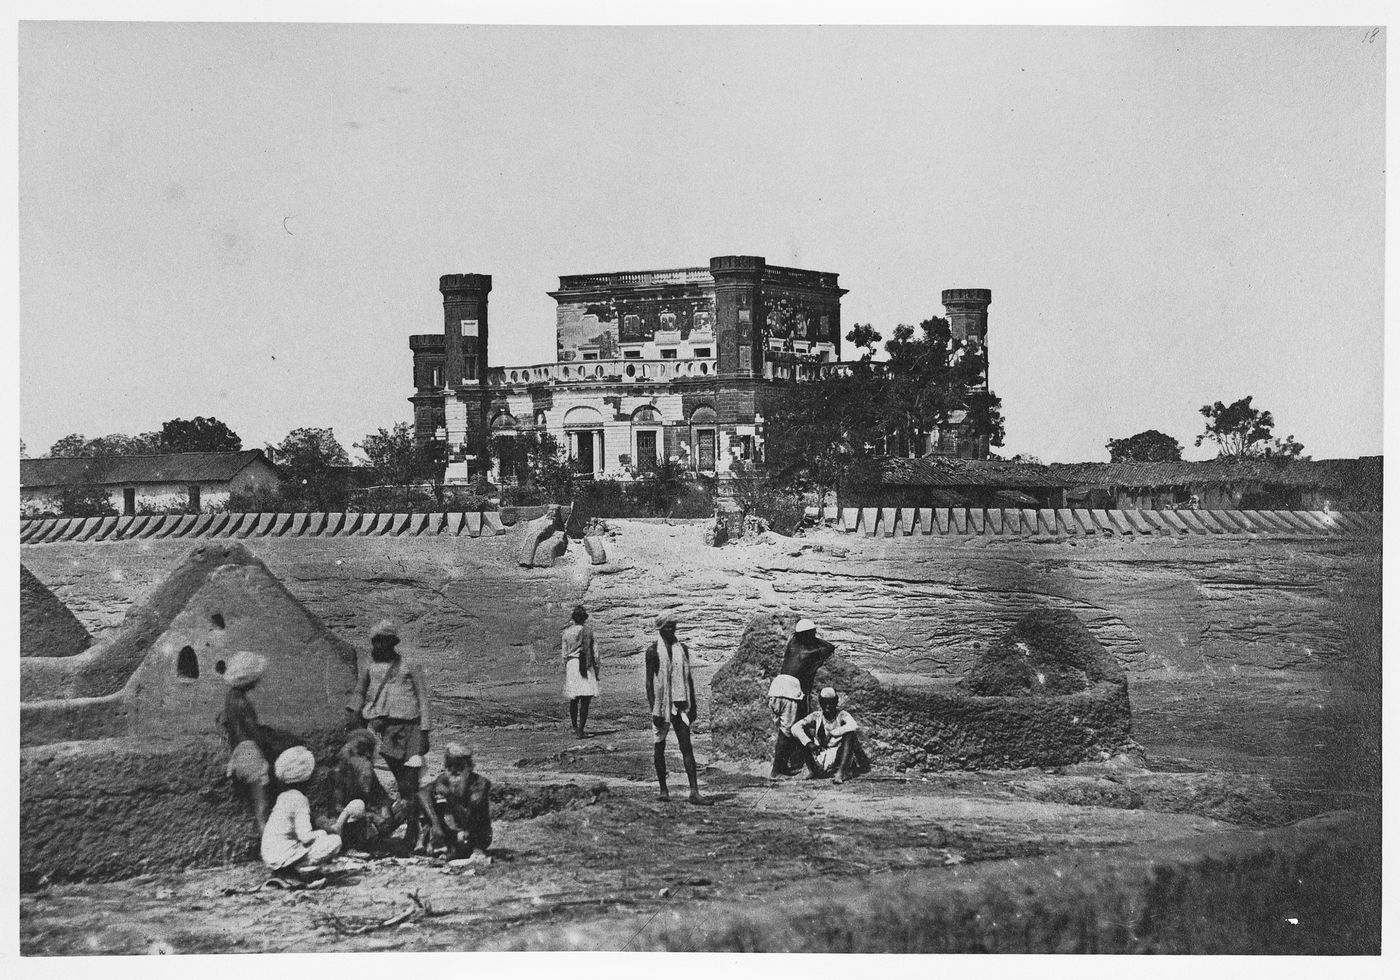 Distant view of the Khurshid Manzil [House of the Sun Palace] (now part of La Martinière College) showing fortifications in the foreground, Lucknow, India